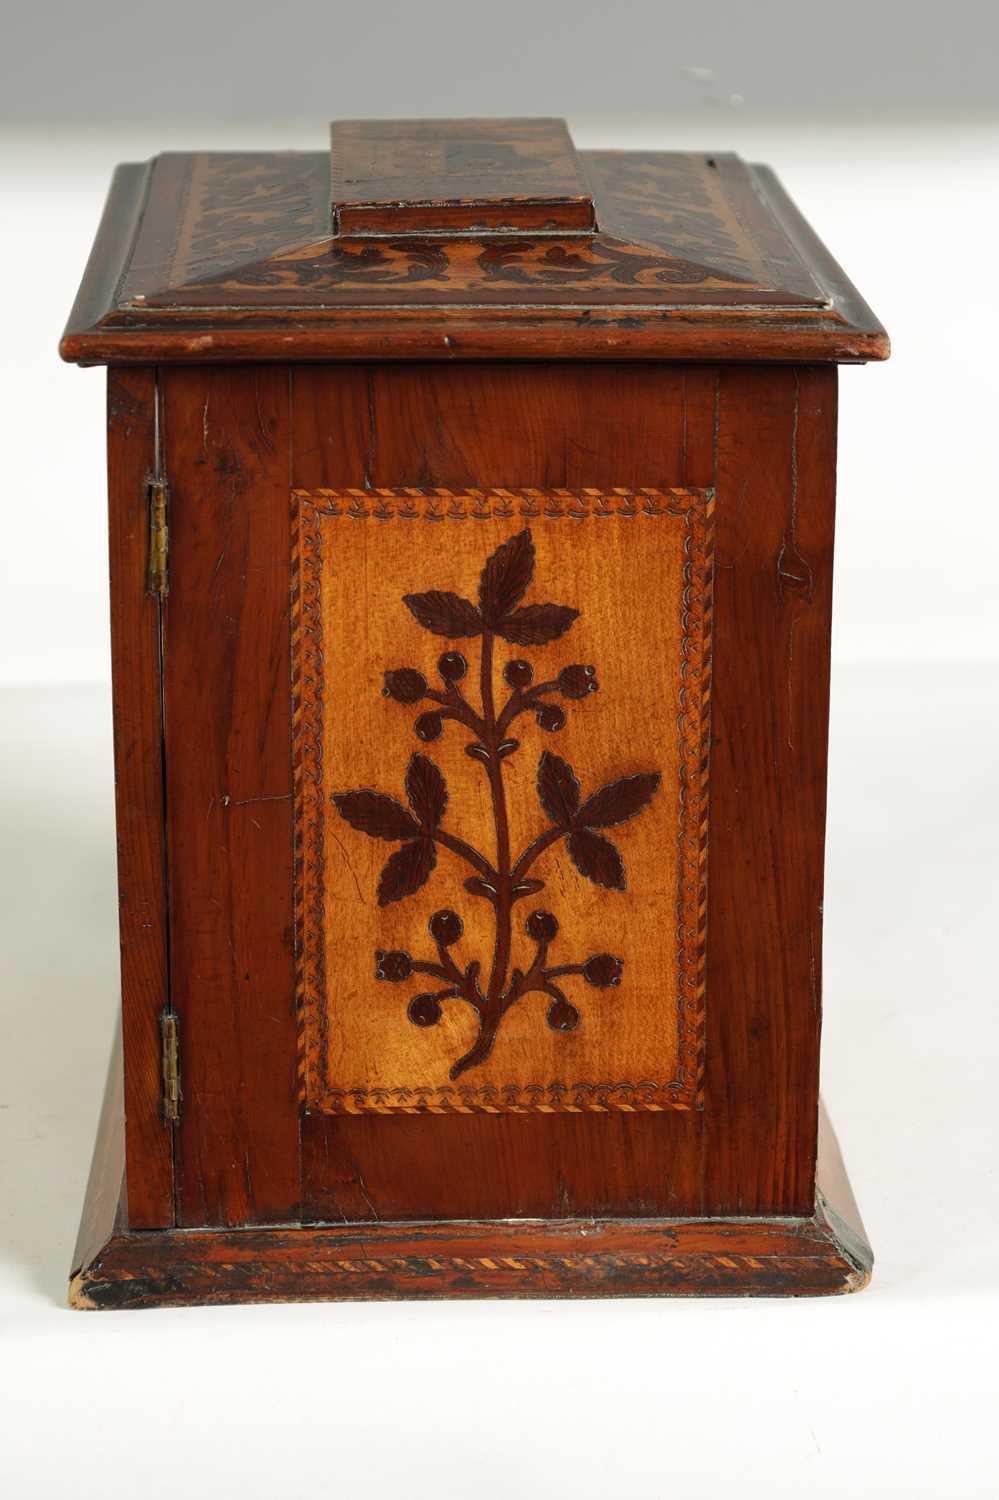 A GOOD 19TH CENTURY KILLARNEY WARE YEW WOOD SEWING CABINET - Image 14 of 14